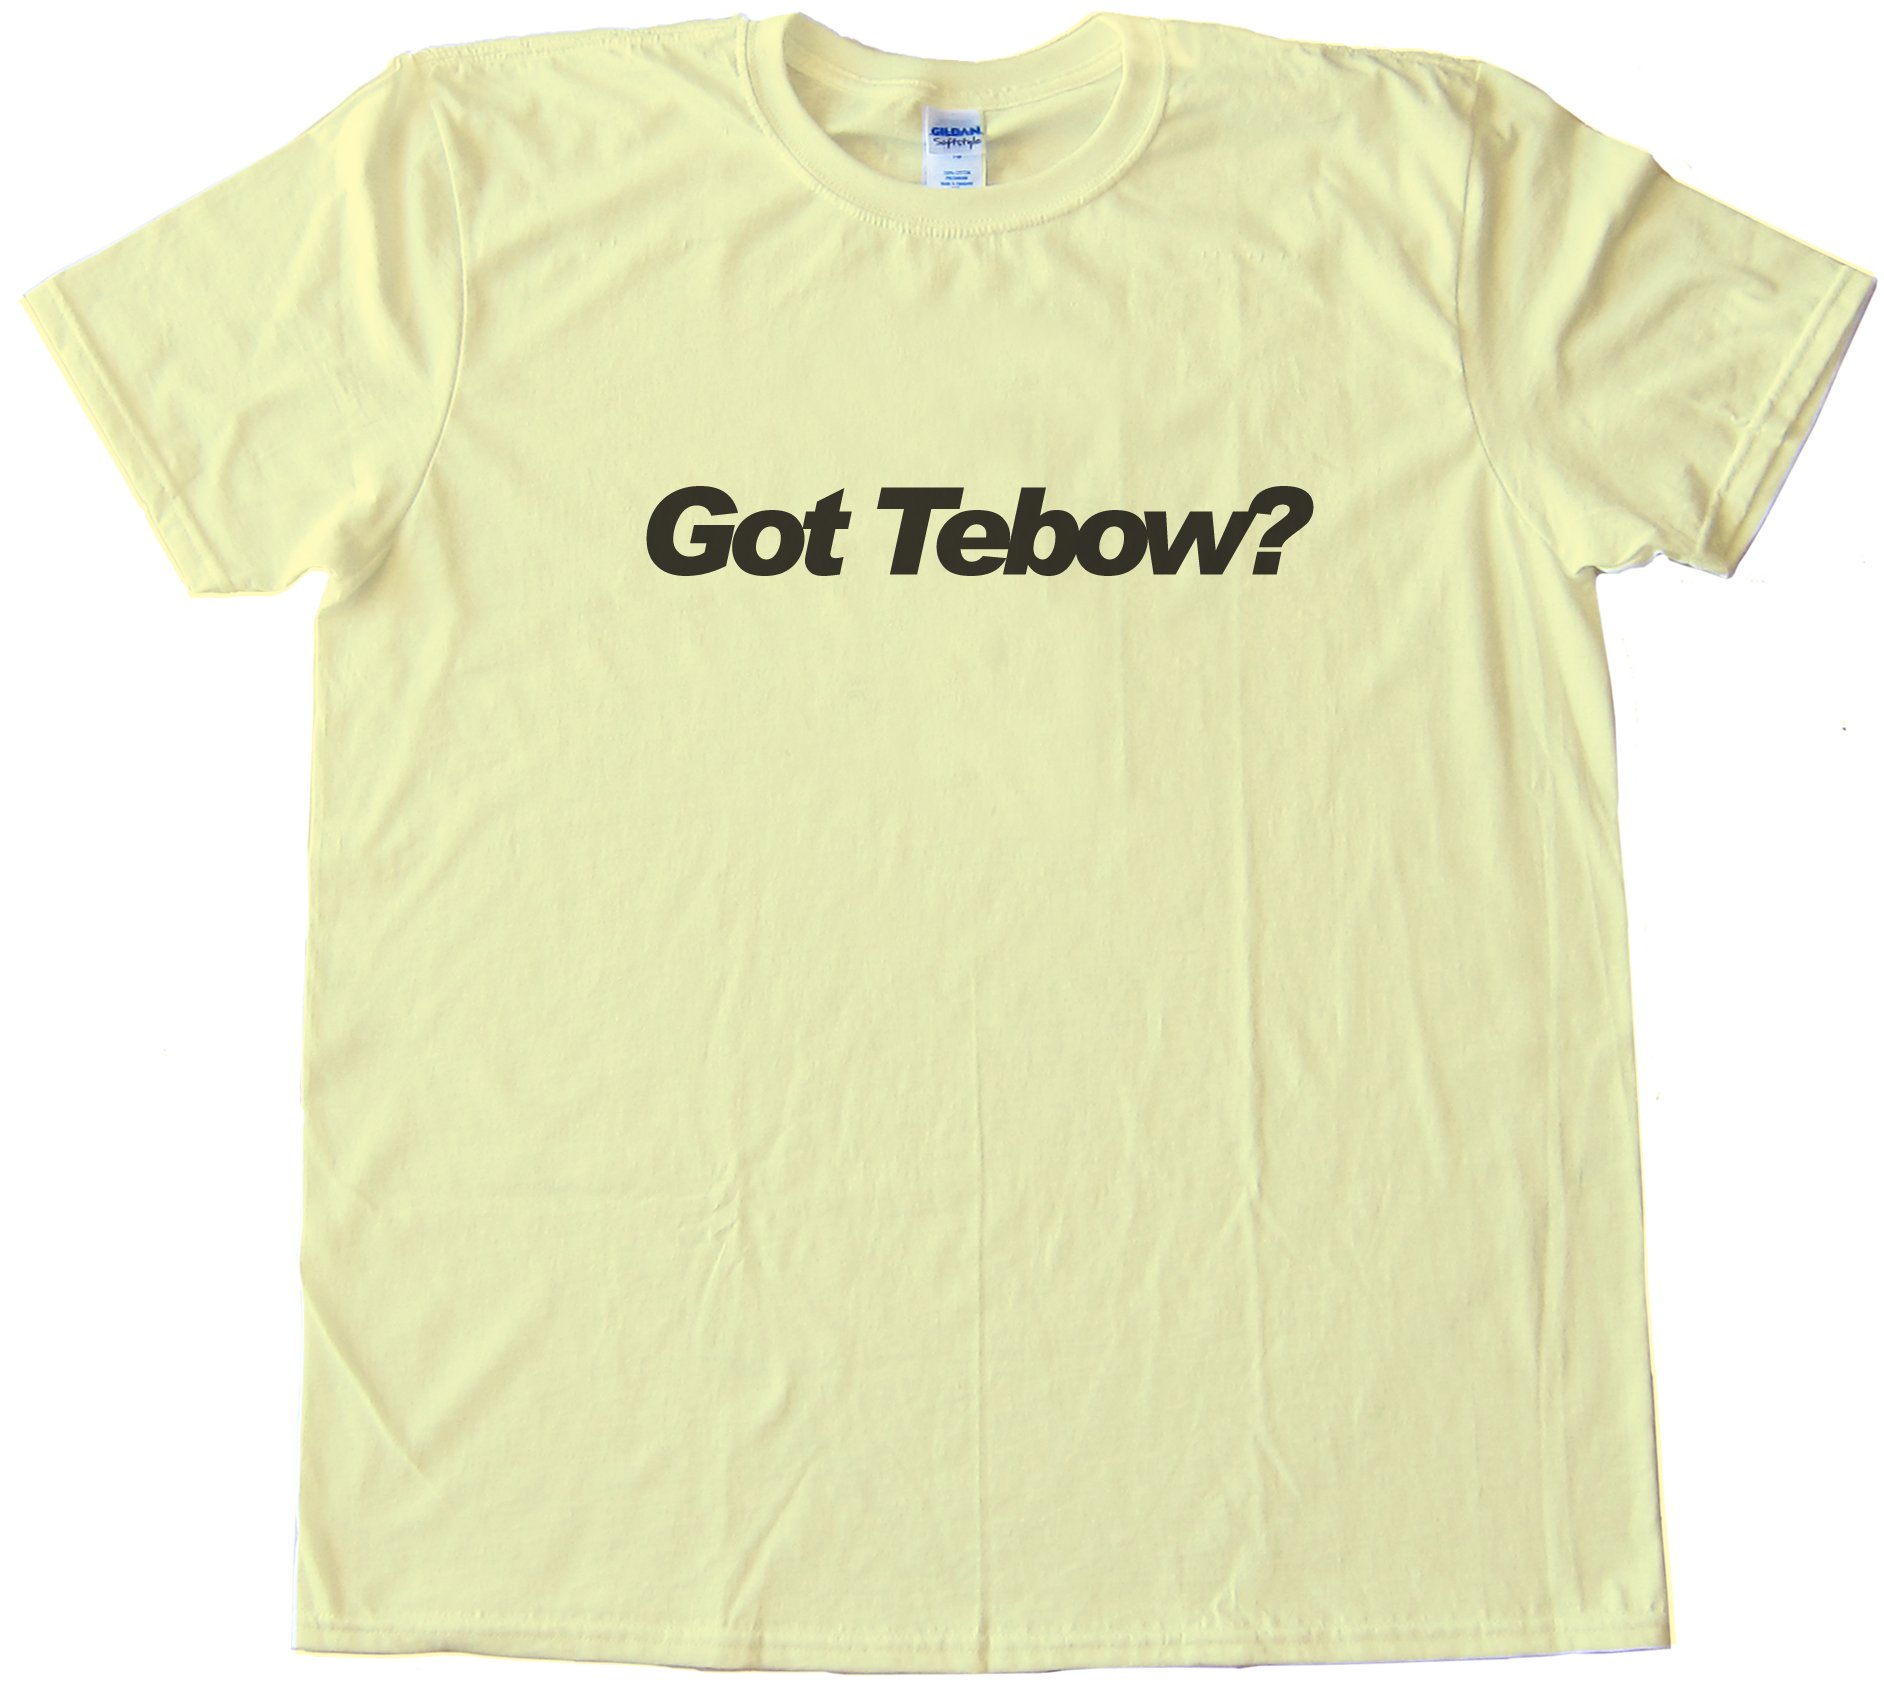 Got Tebow? Tim Tebow Ny Jets Tee Shirt